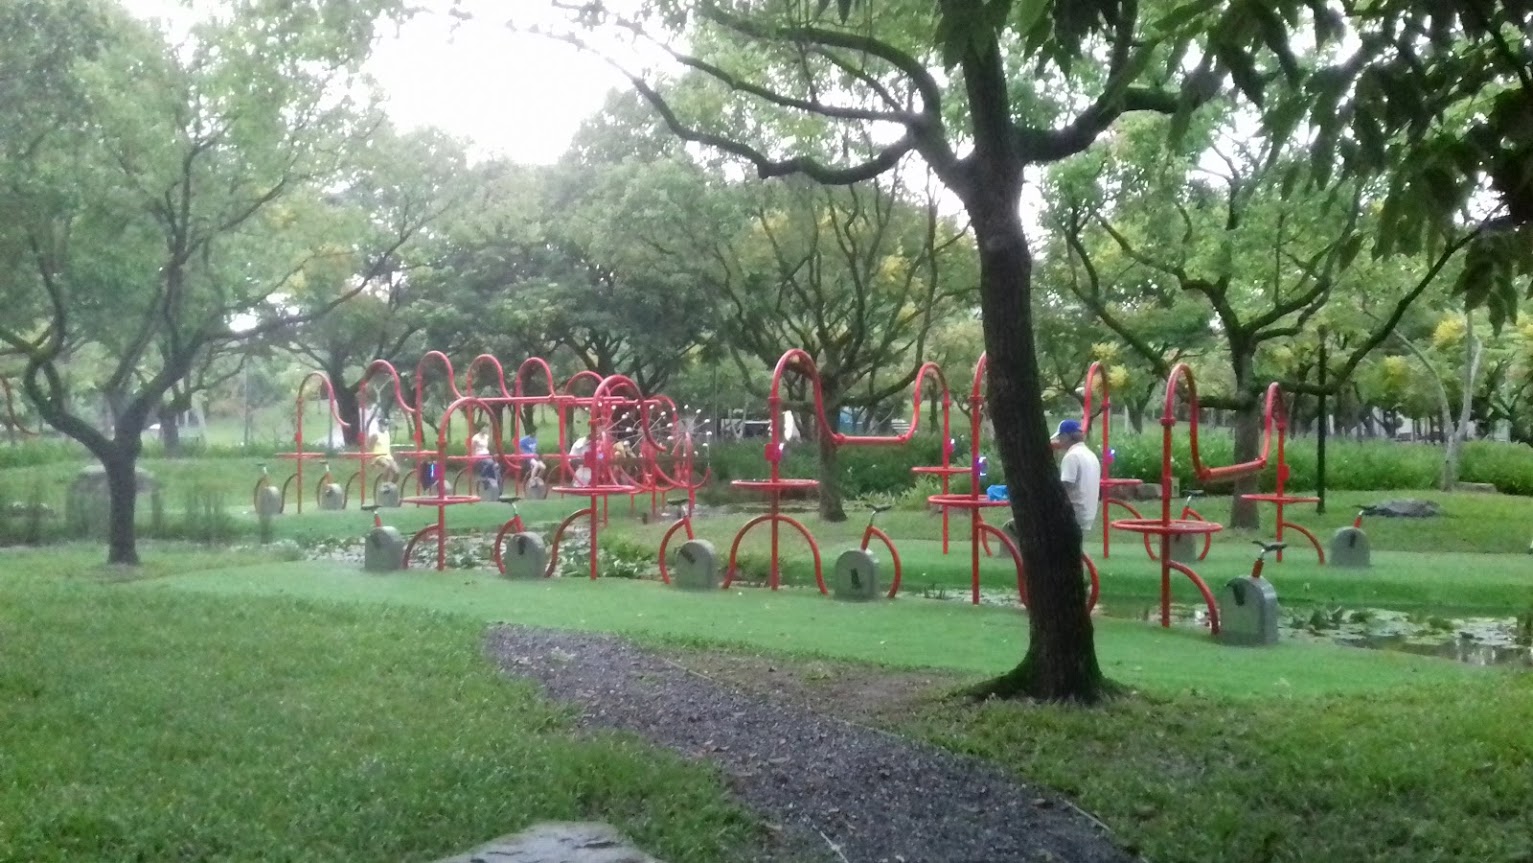 Residents in a large park in Taipei, Taiwan, during the summer period. There is grass on the ground and a number of low trees, with exercise equipment in the middleground.